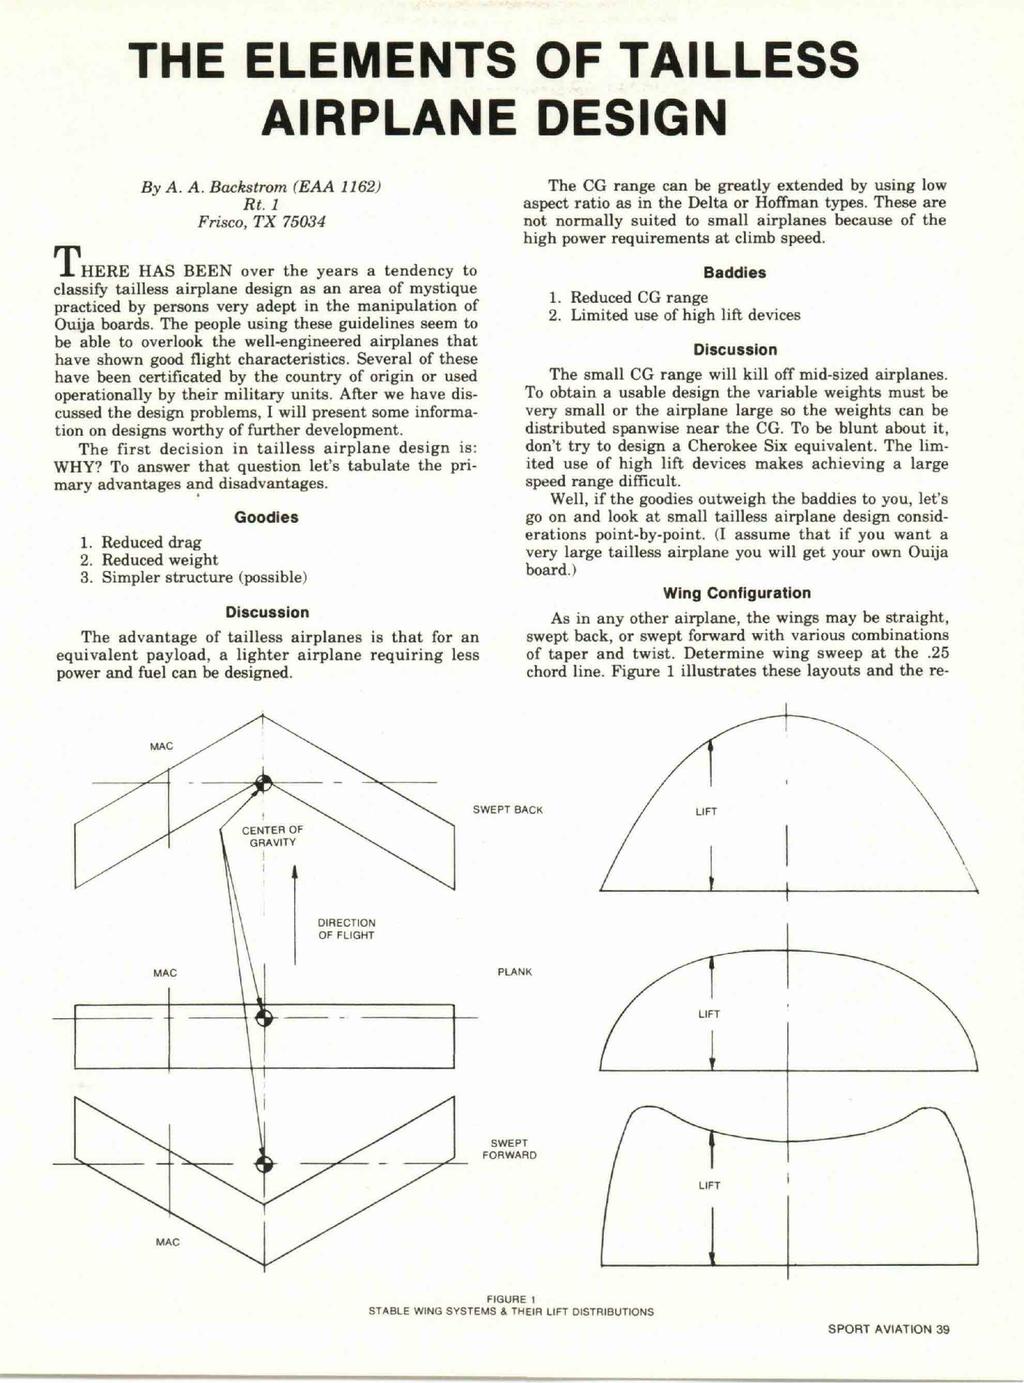 THE ELEMENTS OF TAILLESS AIRPLANE DESIGN By A. A. Backstrom (EAA 1162) Rt.l Frisco, TX 75034 J.